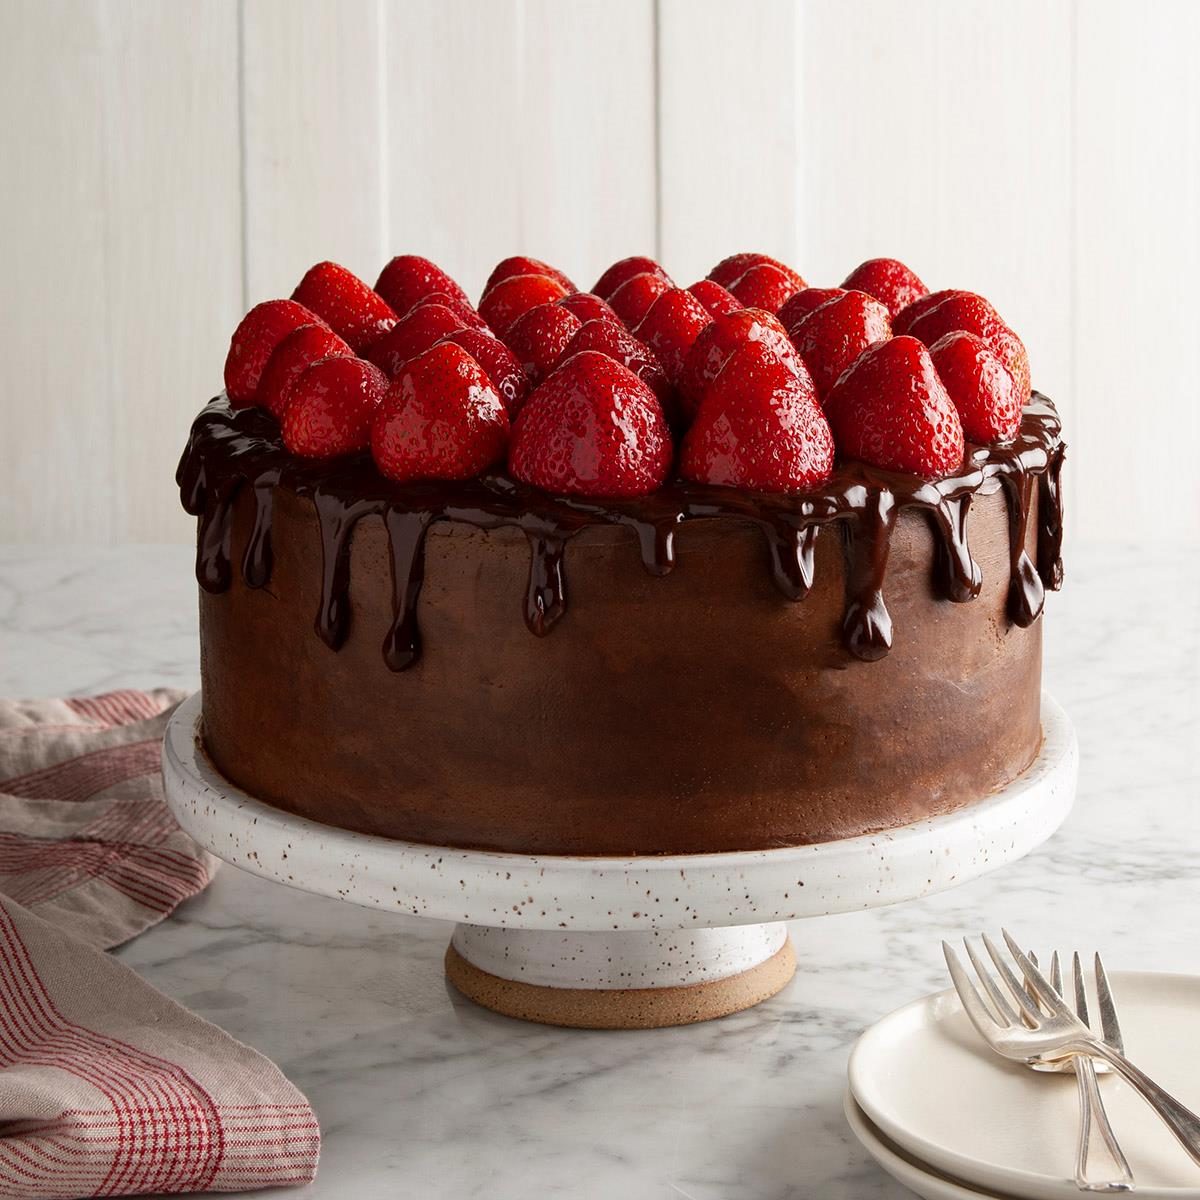 12 Types of Cake to Add to Your Baking Repertoire | Epicurious